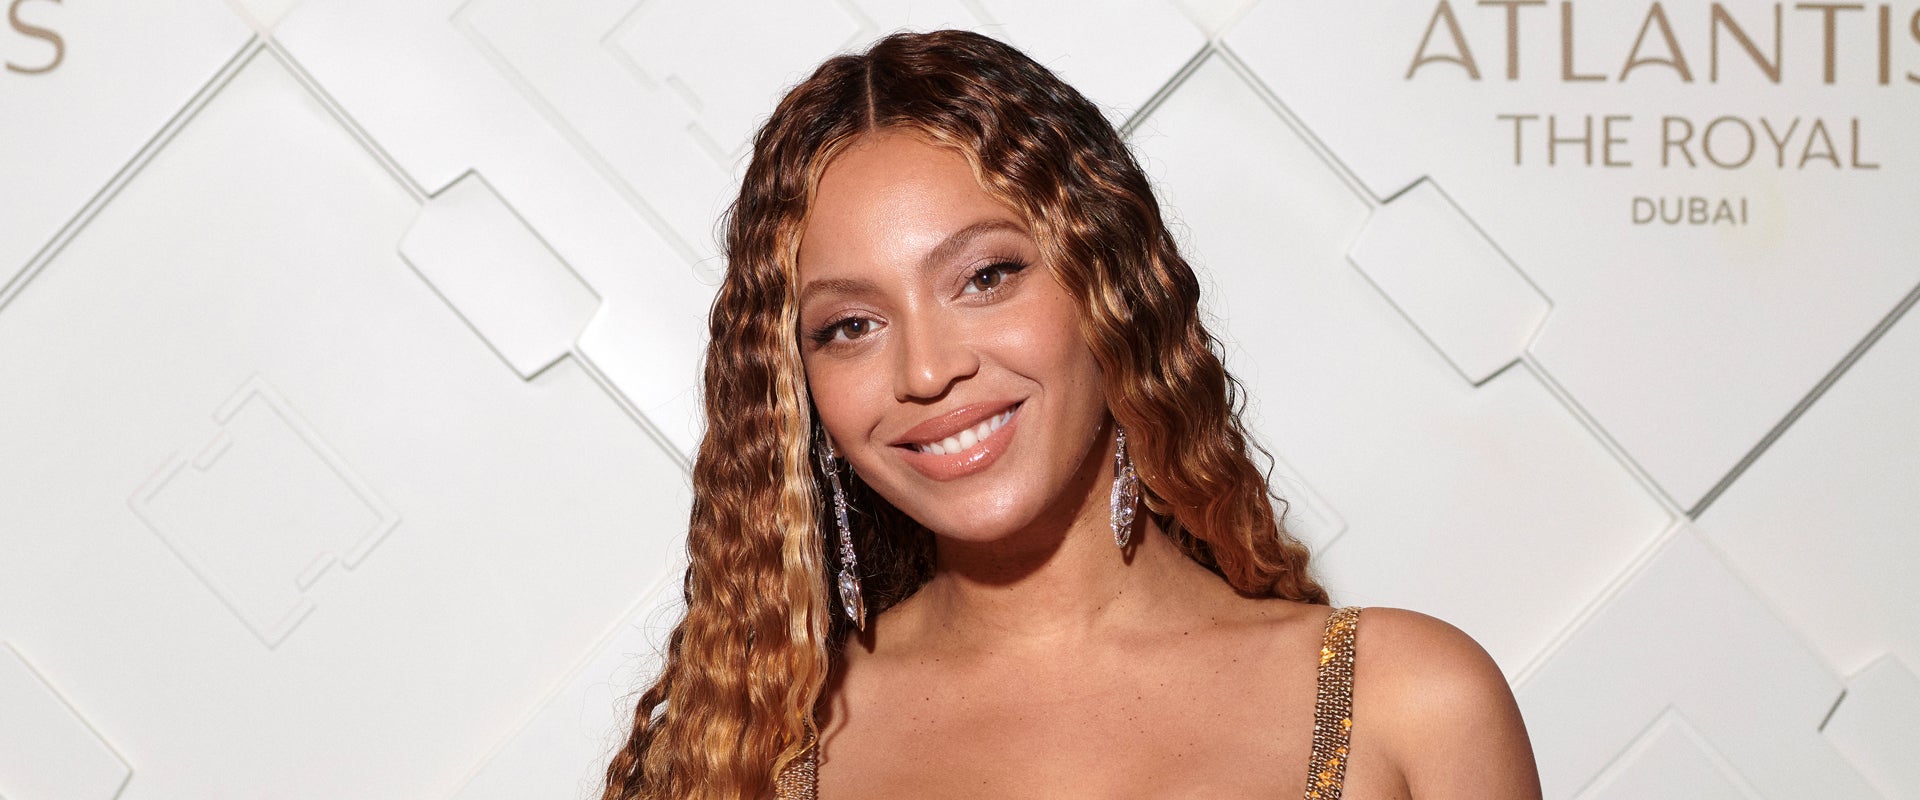 Beyoncé Makes History at a Star-Powered Grammy Ceremony - The New